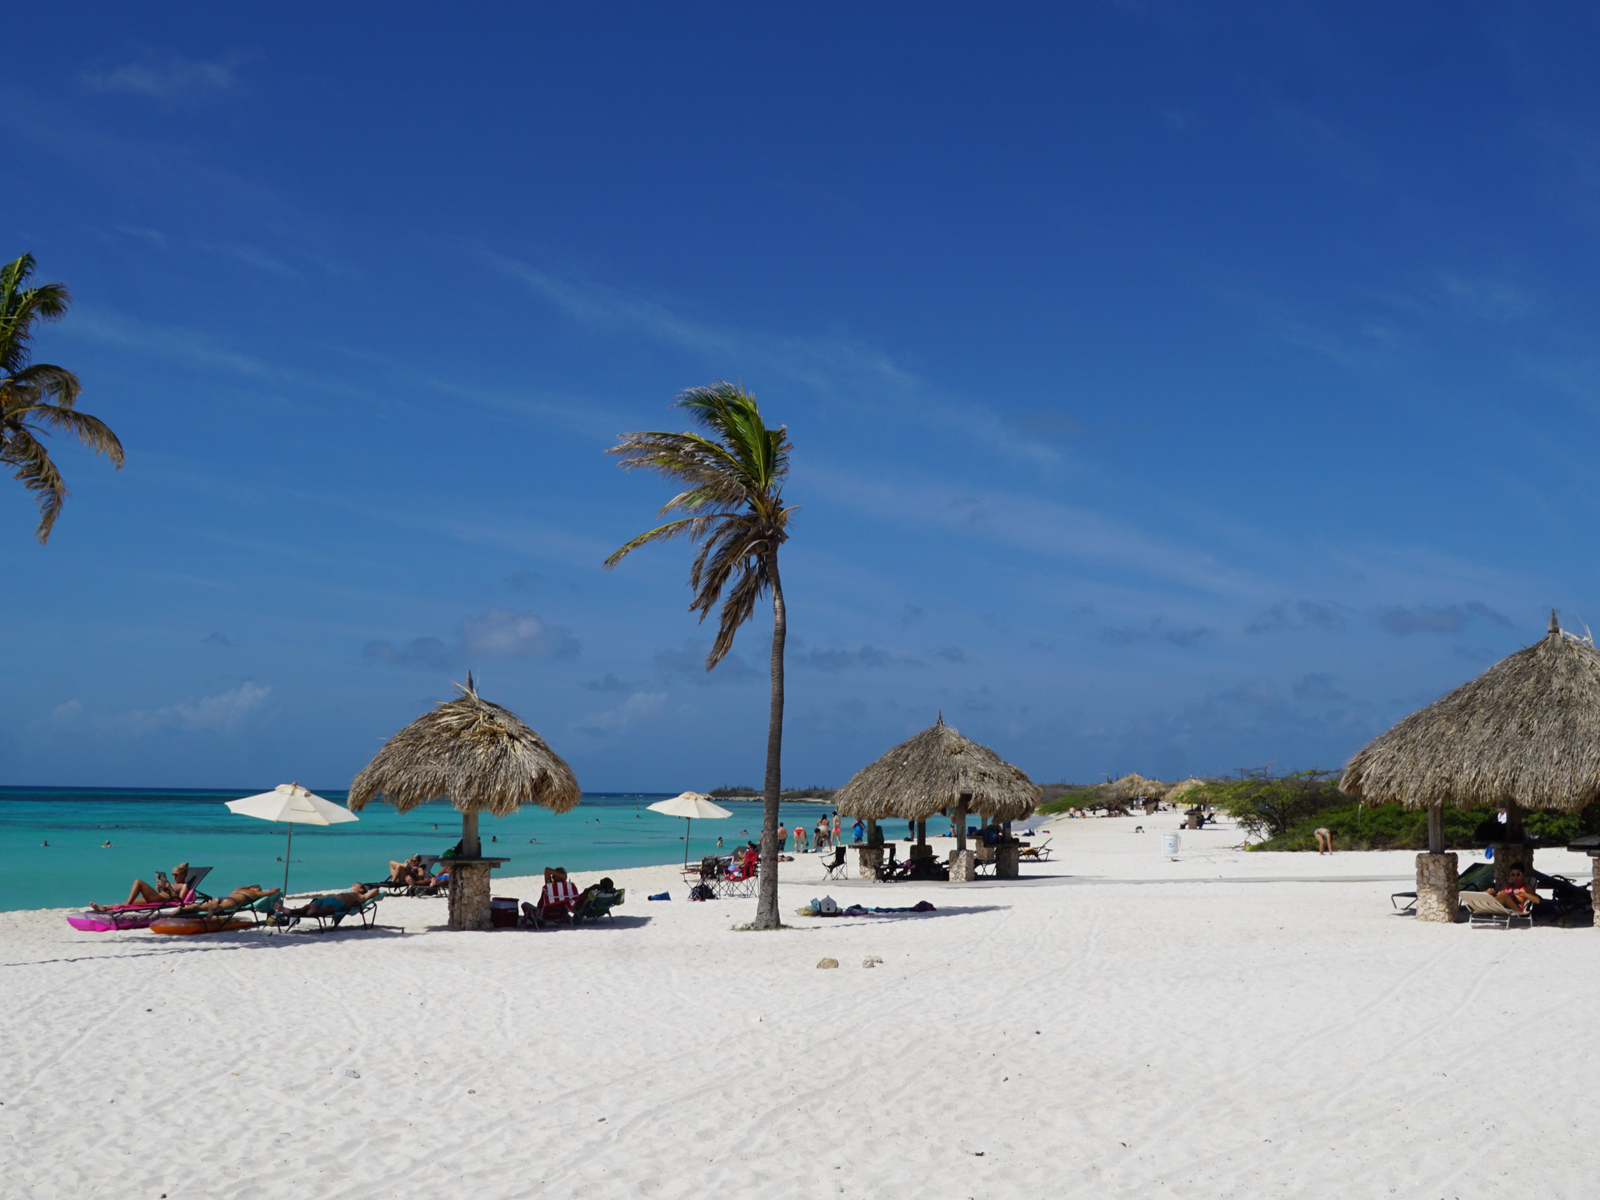 Tourist sunbathing on a hot day at the secluded beach of Arashi Beach, one of the best beaches in Aruba with native huts and palms trees